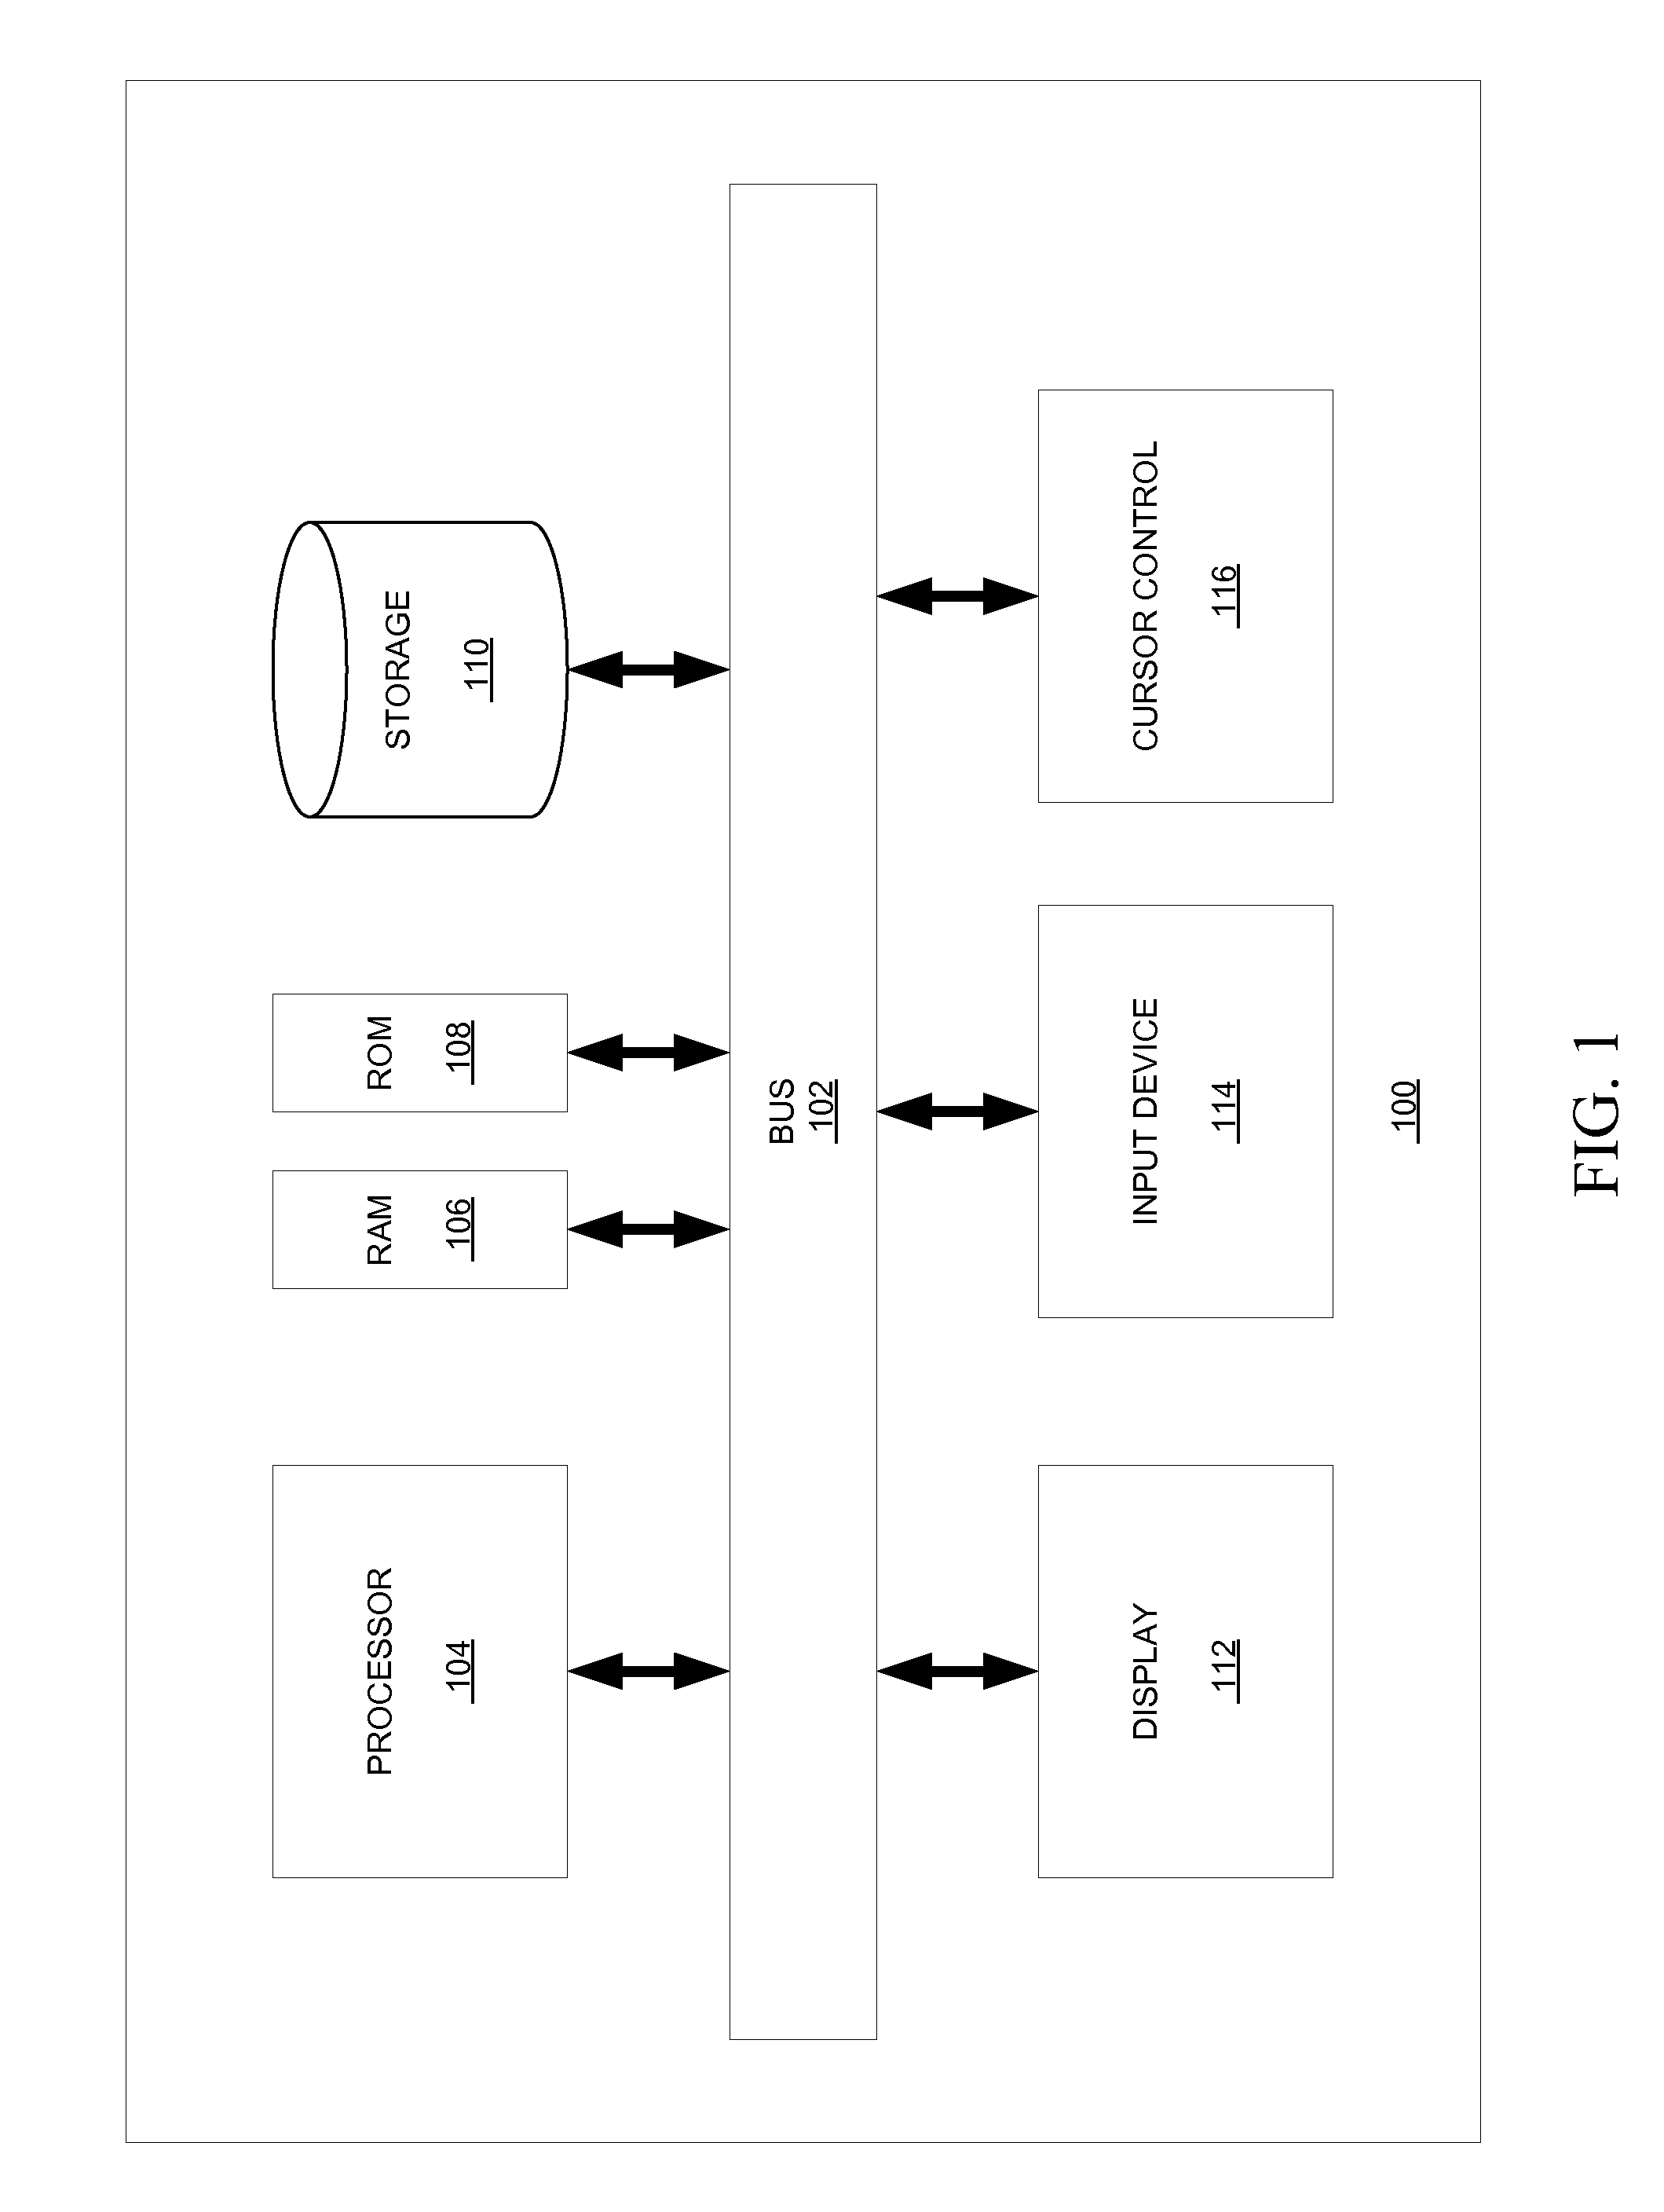 Systems and Methods for Detecting Structural Variants